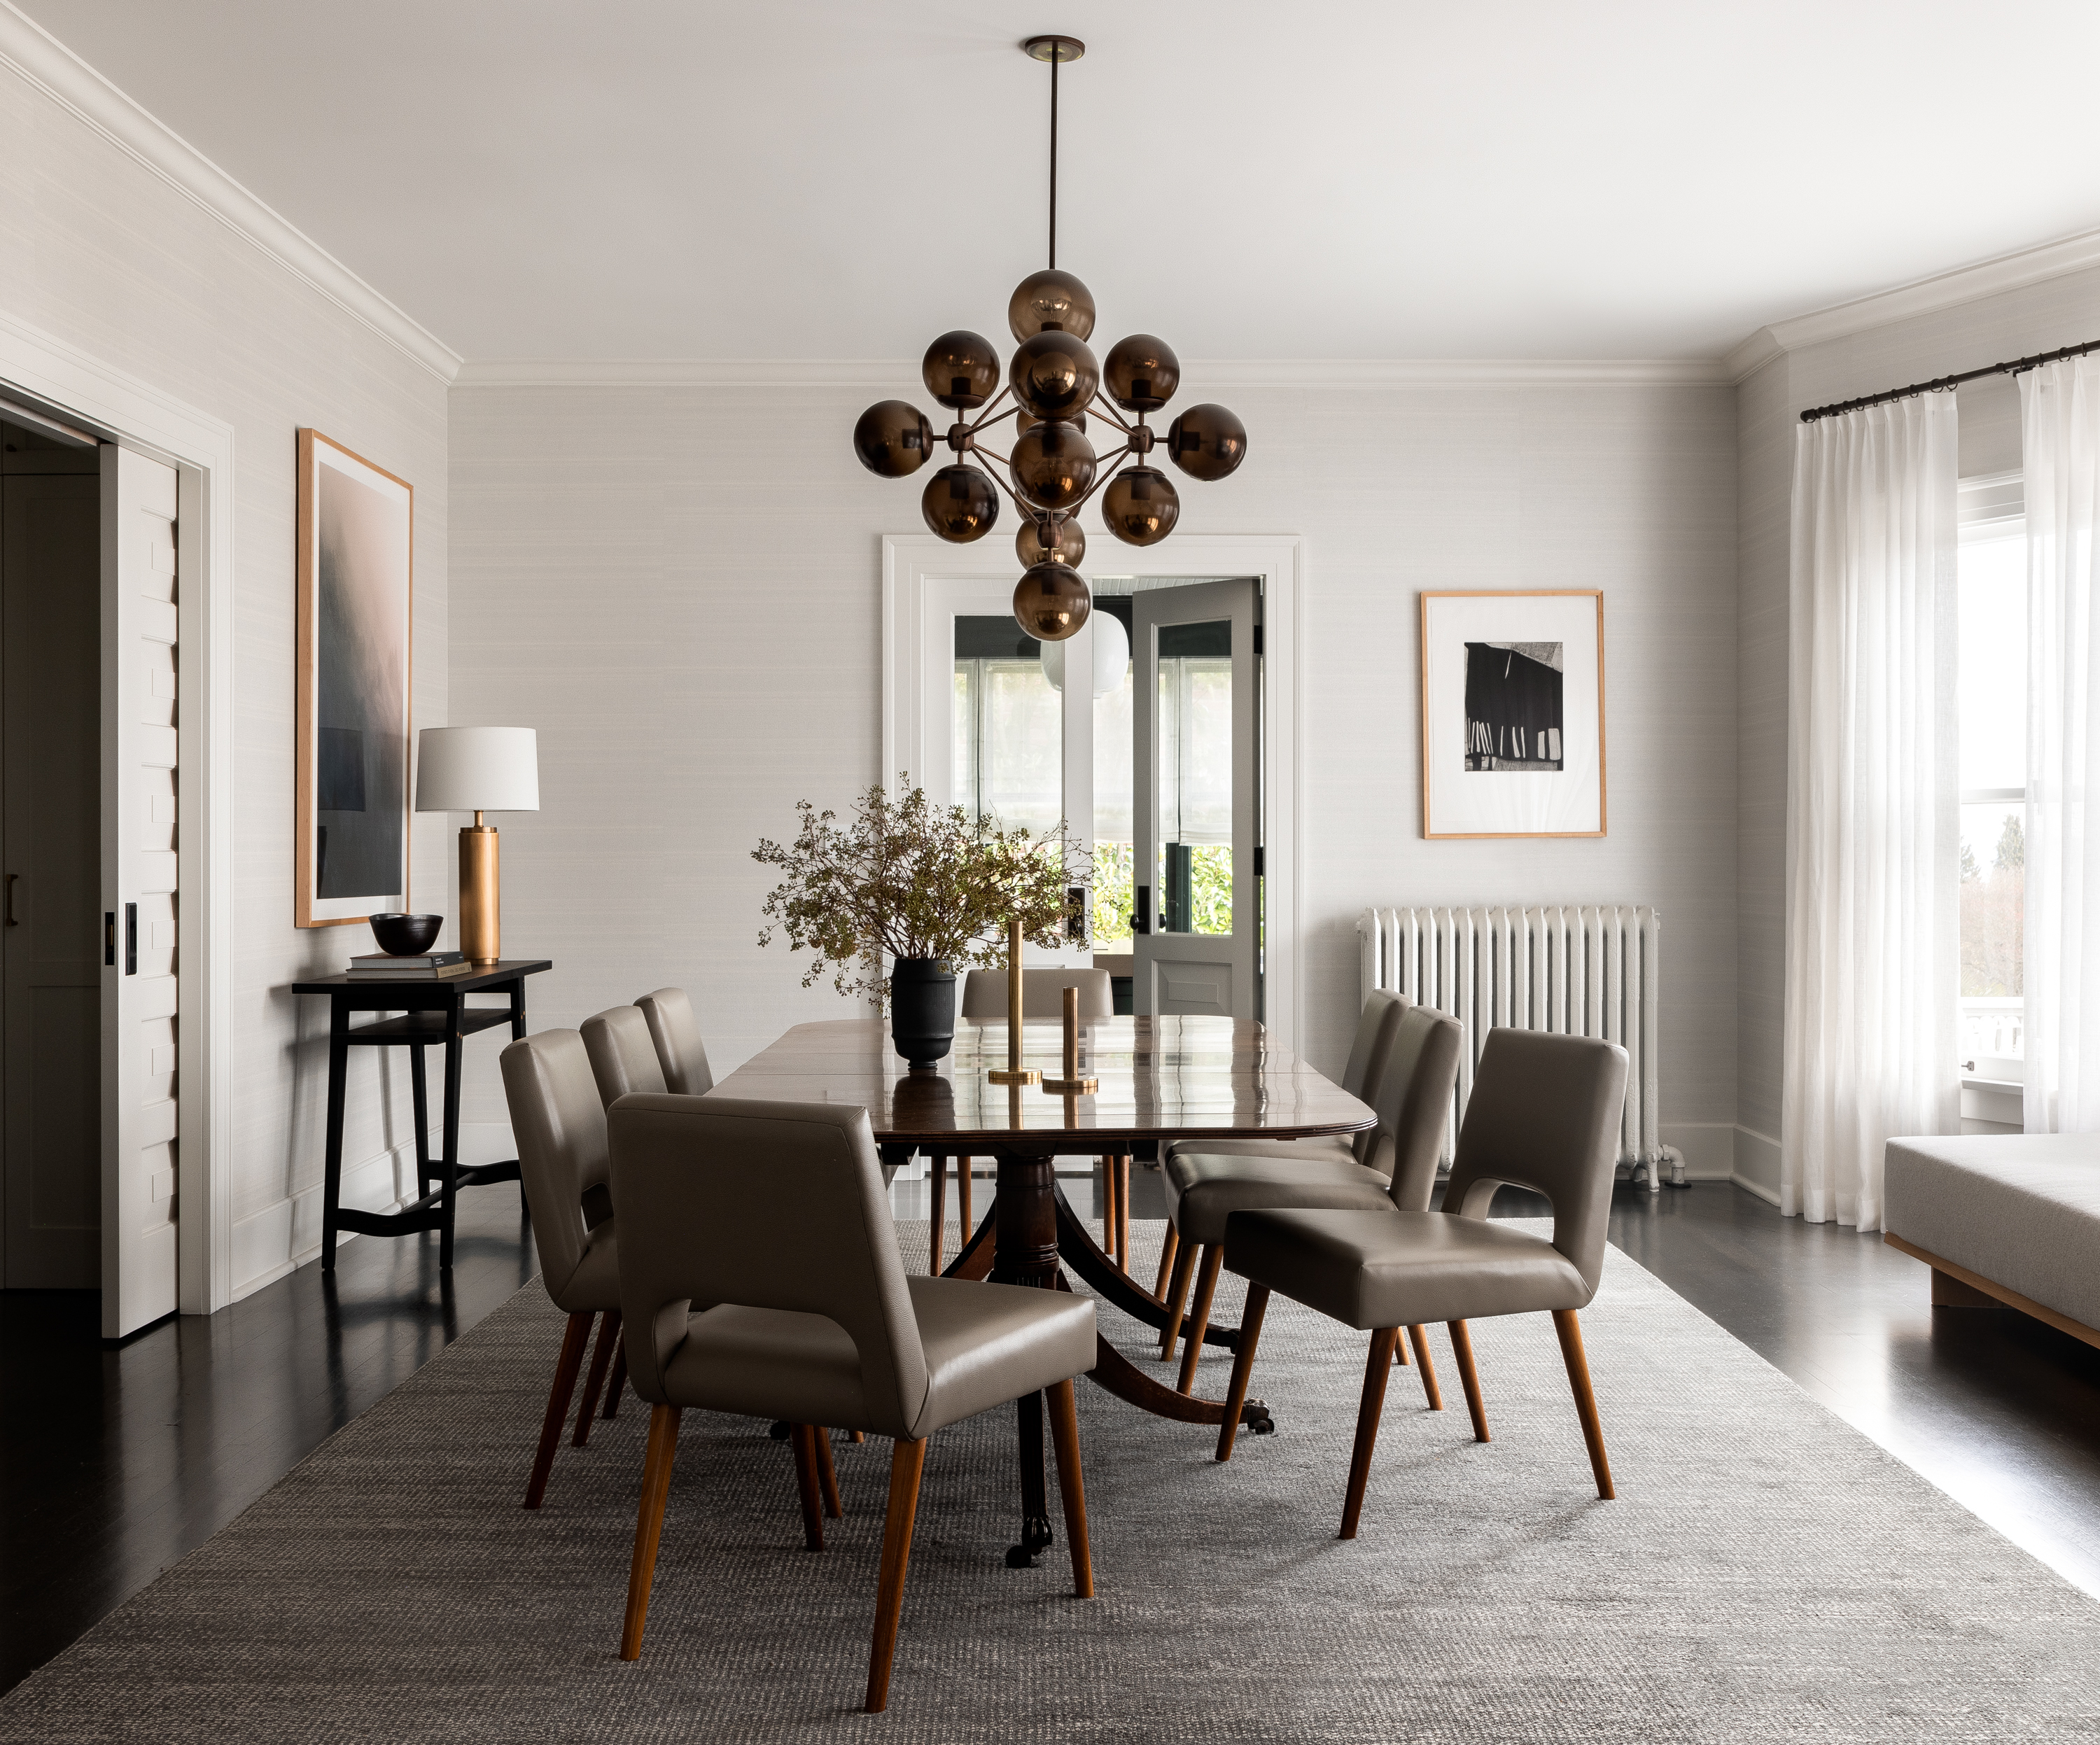 A serene dining room with a white and smokey gray color scheme, creating an elegant and tranquil ambiance.